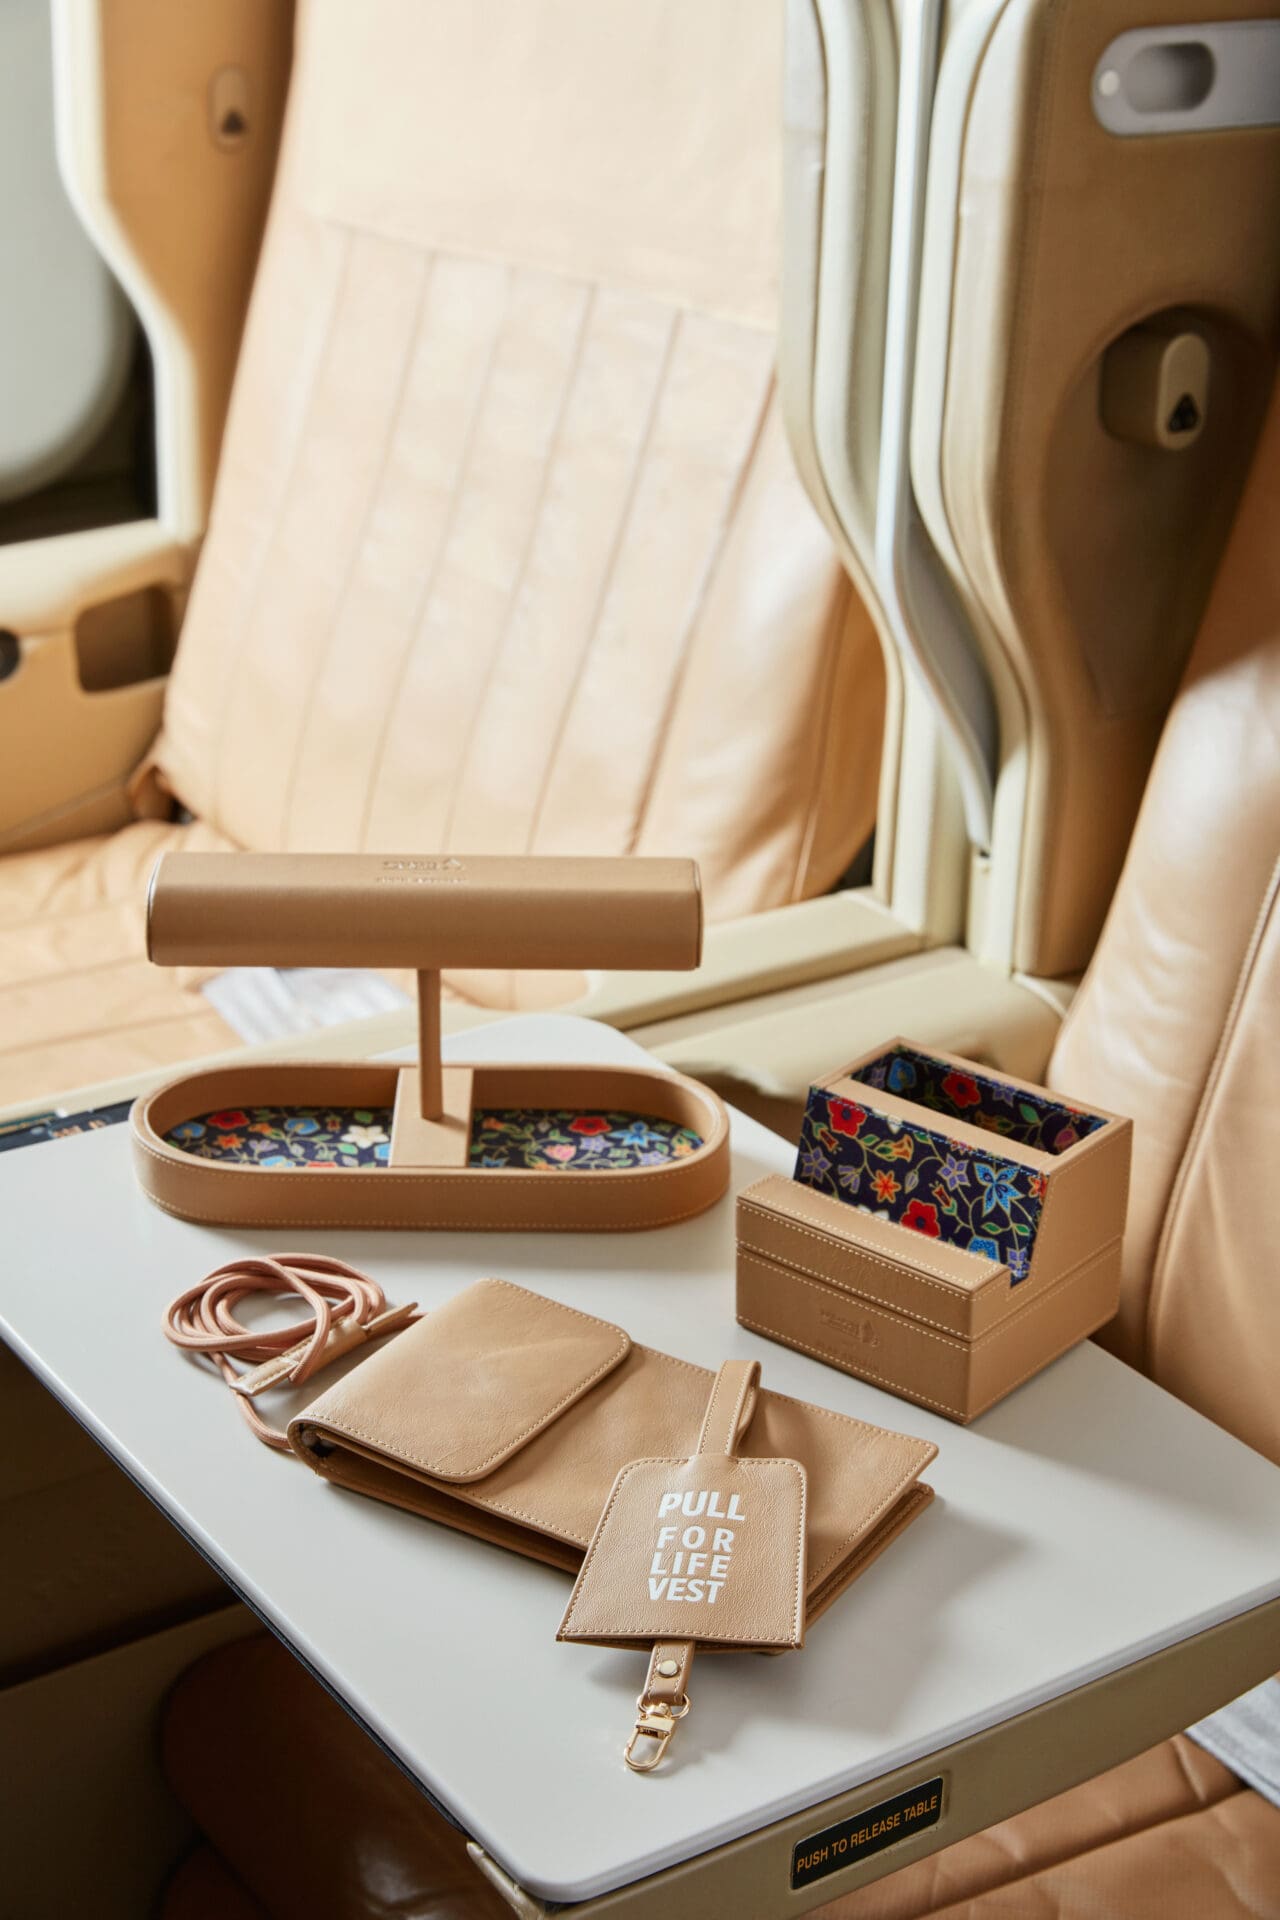 Airline news and trends | A collection of camel-coloured leather good sits on an airplane seat table